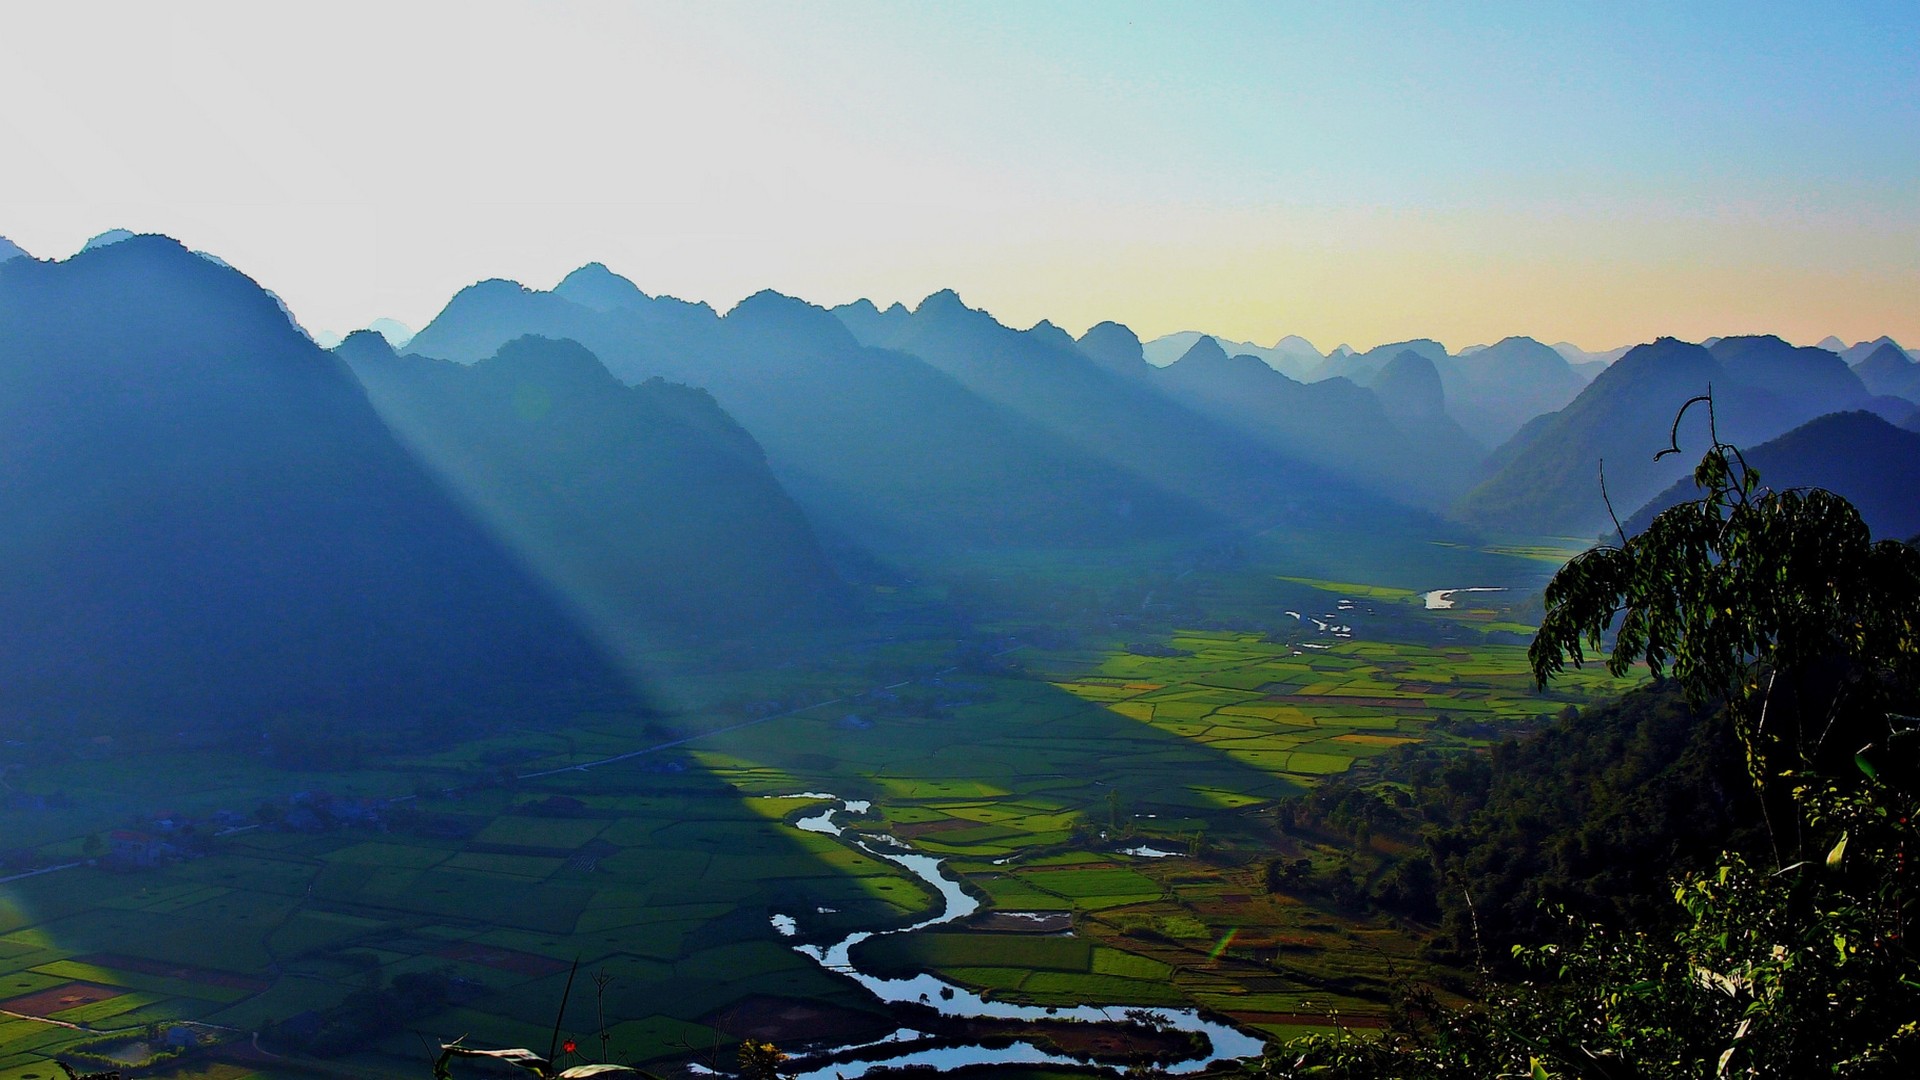 General 1920x1080 landscape nature mountains mist valley river field sun rays Vietnam sunlight shadow clear sky morning farm